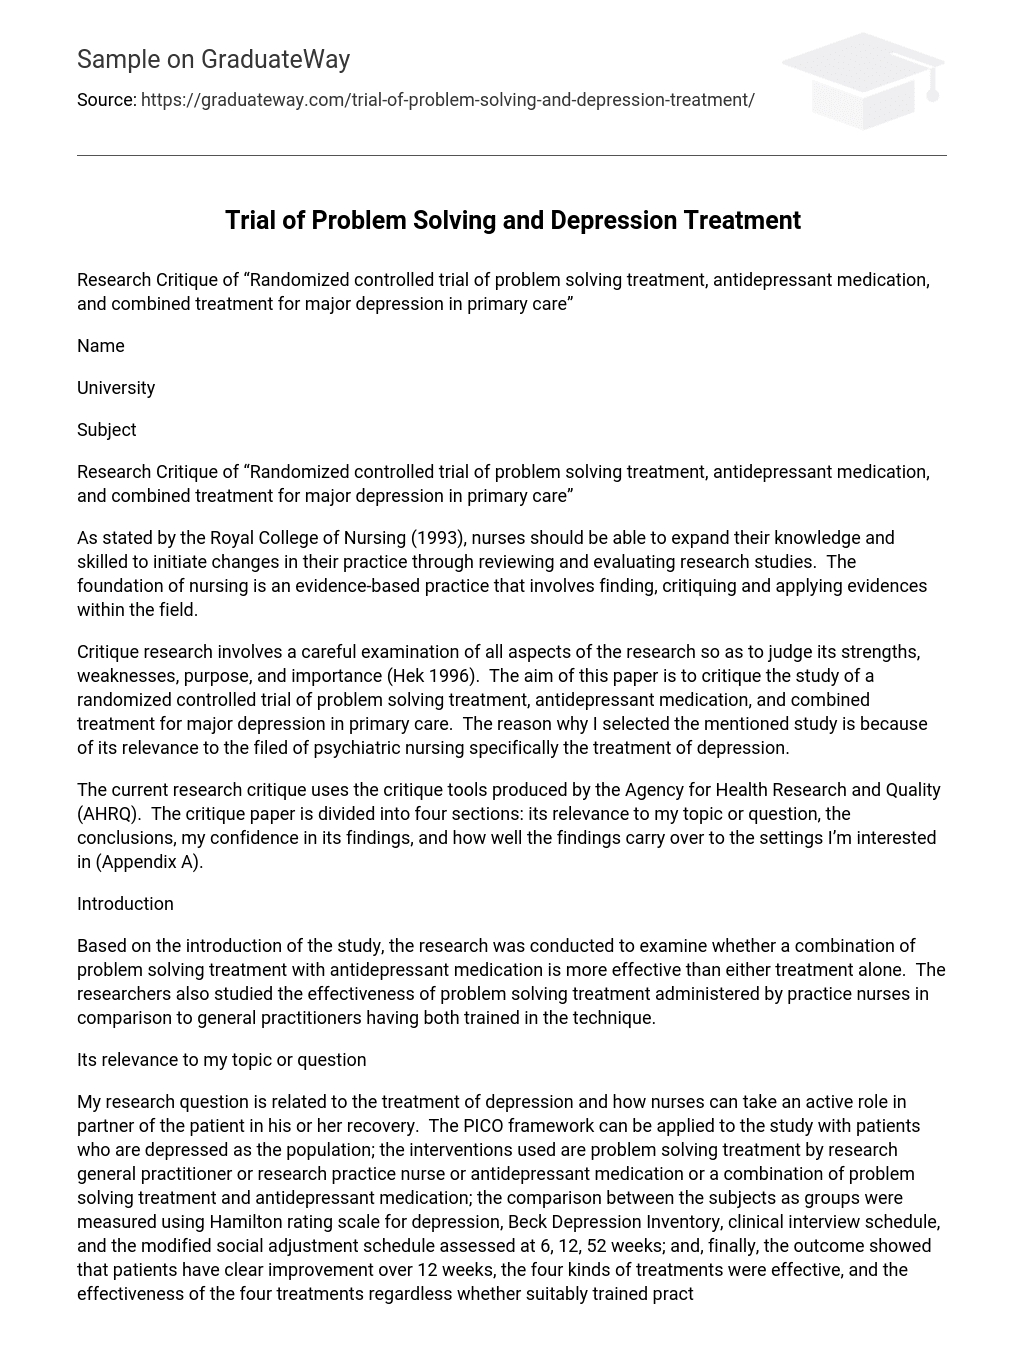 Trial of Problem Solving and Depression Treatment